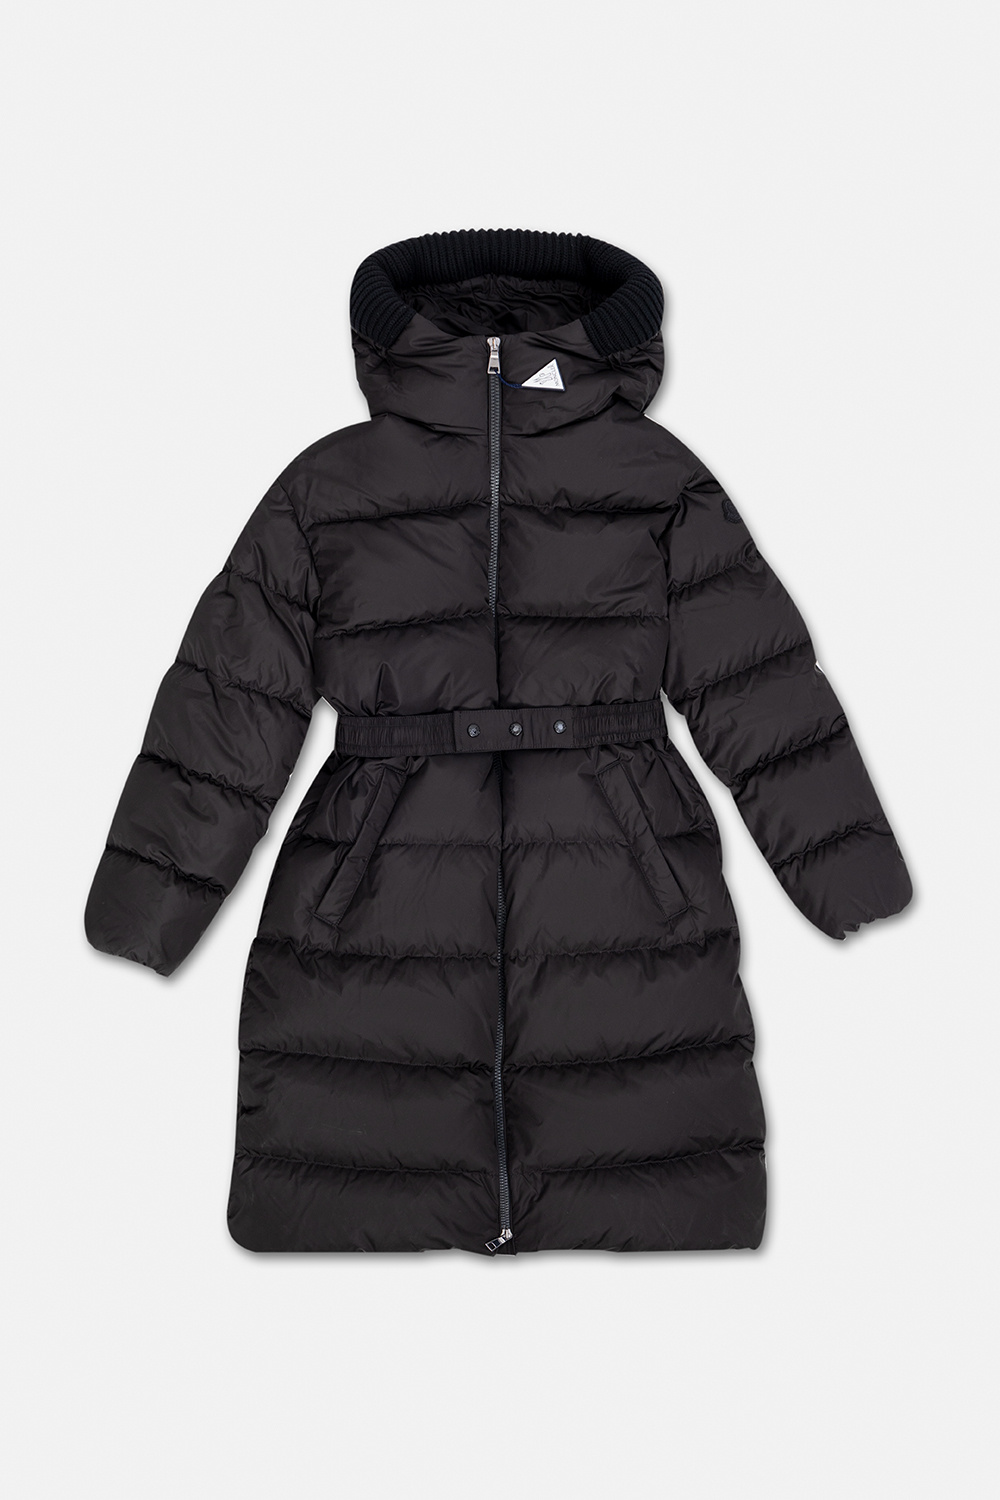 Moncler Logo Patch Zip-up Puffer Jacket in Black